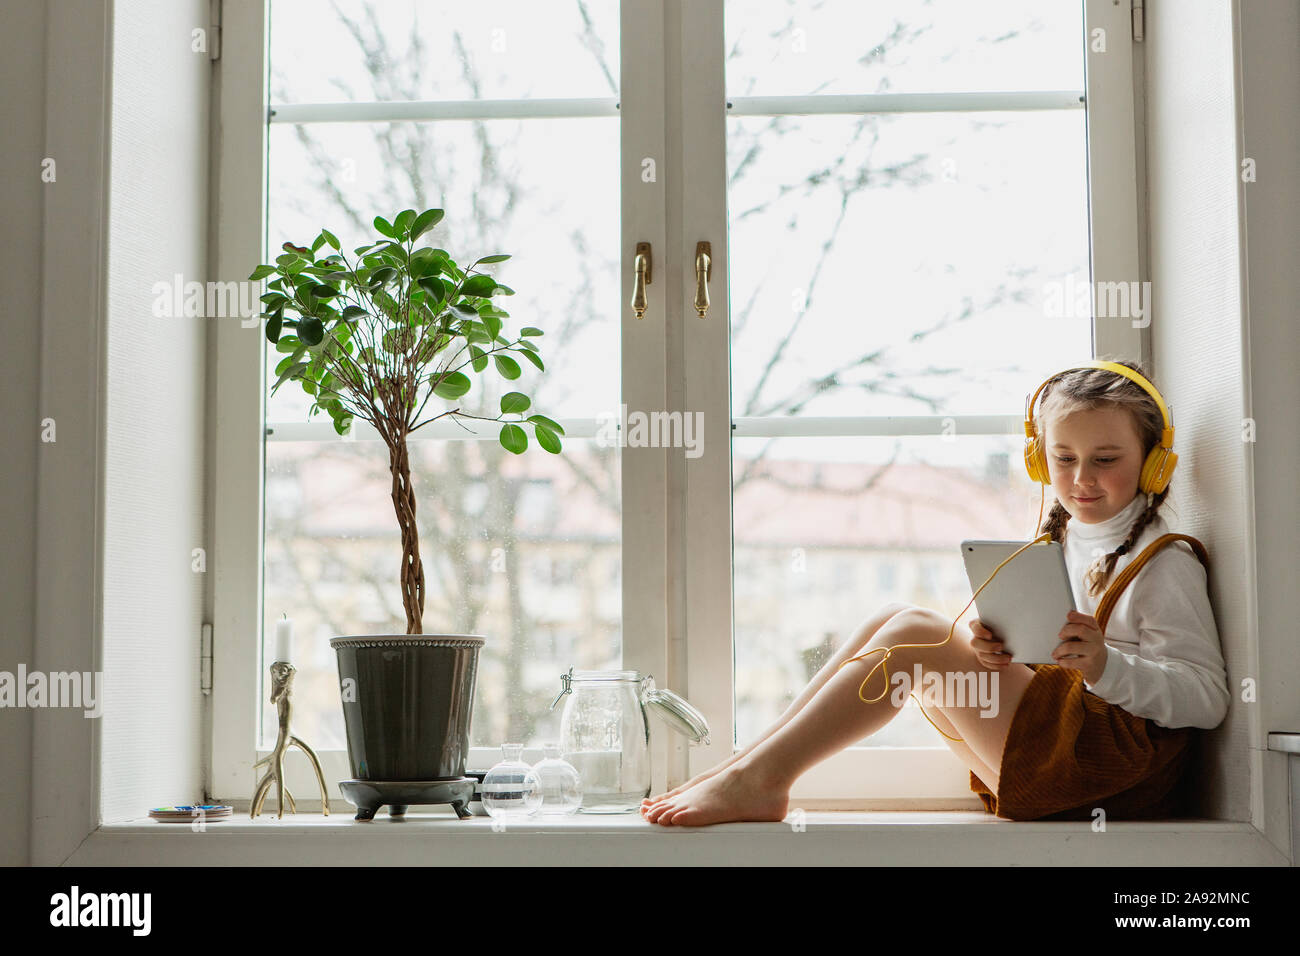 Girl sitting on windowsill with digital tablet Banque D'Images